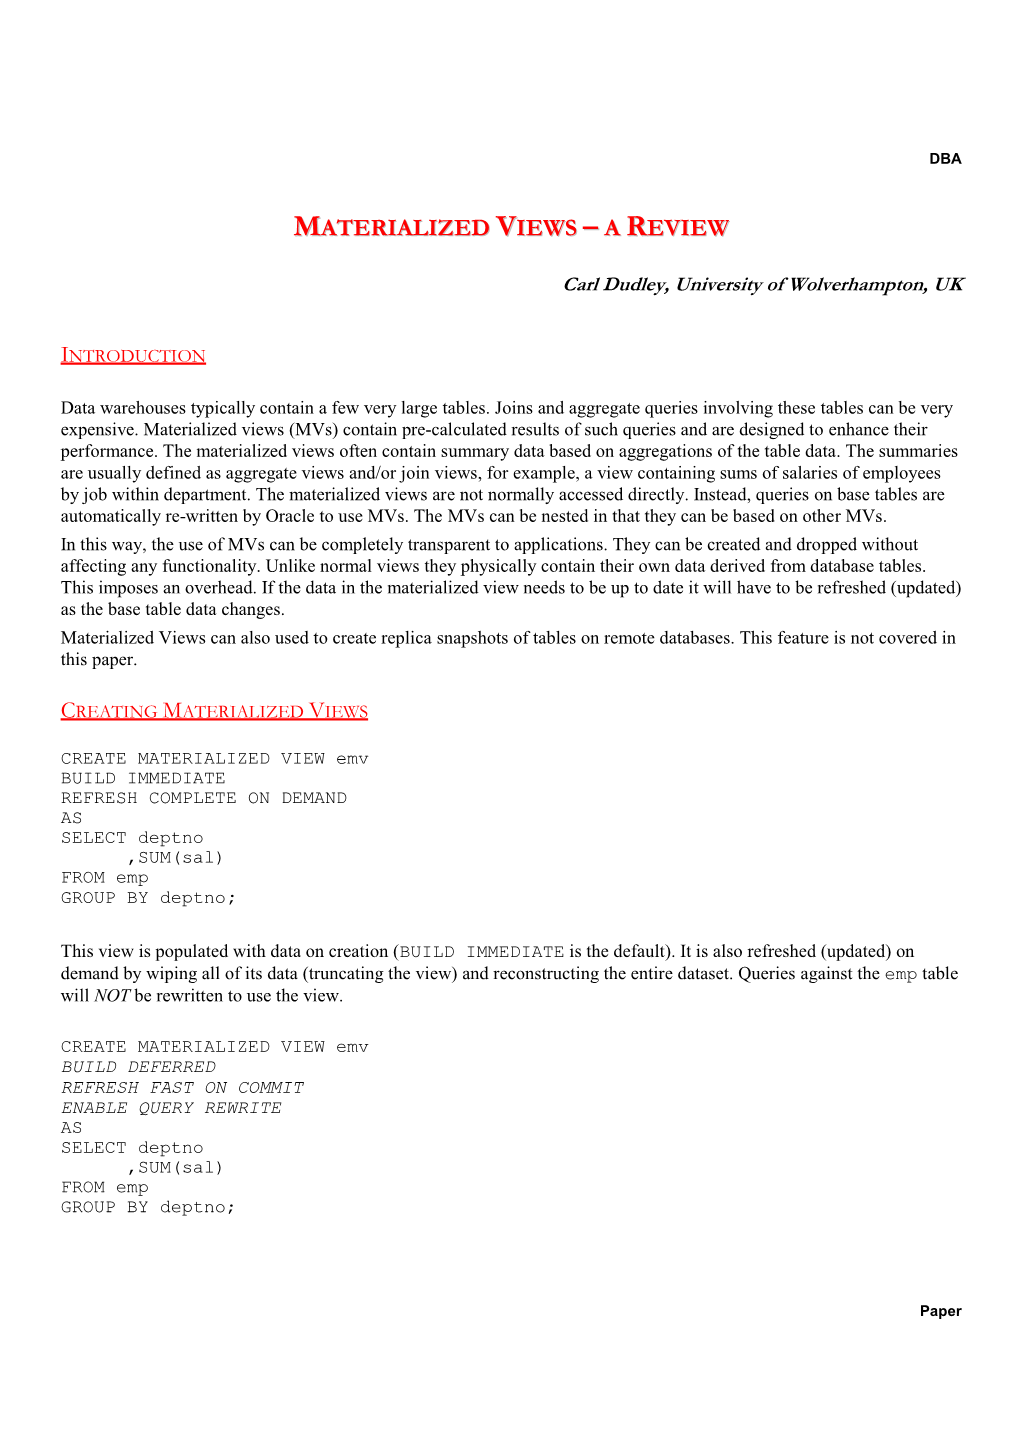 Materialized Views – a Review